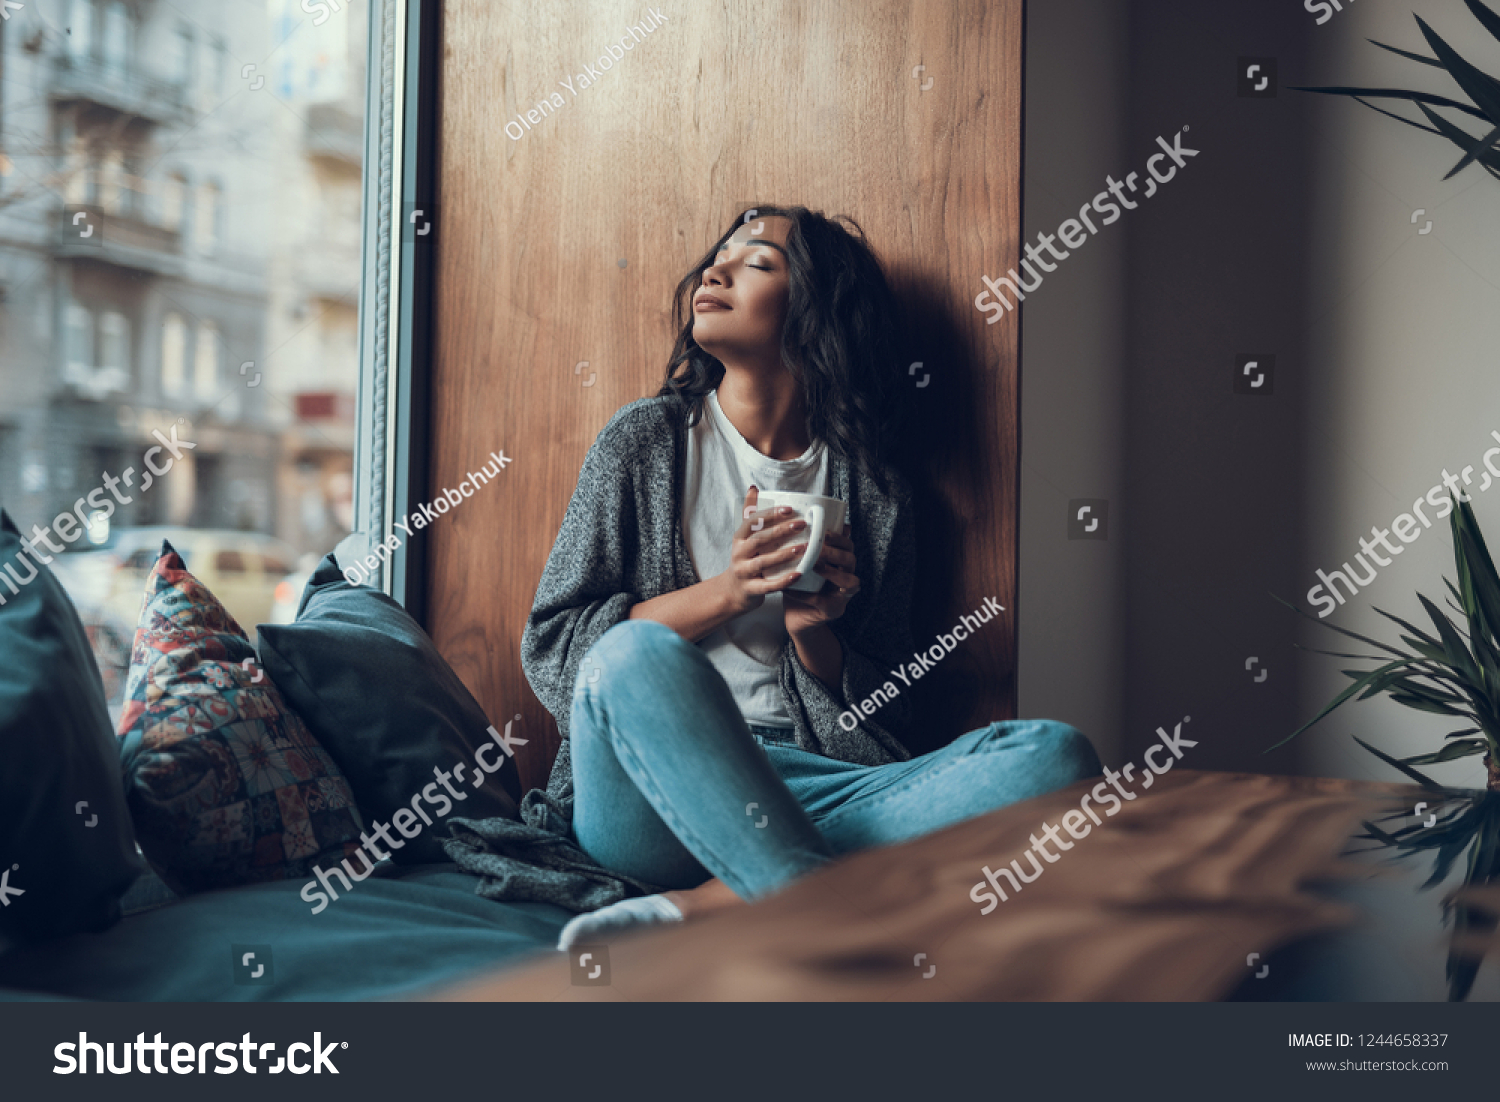 Peaceful young lady sitting on the window sill and smiling while drinking tea with her eyes closed #1244658337